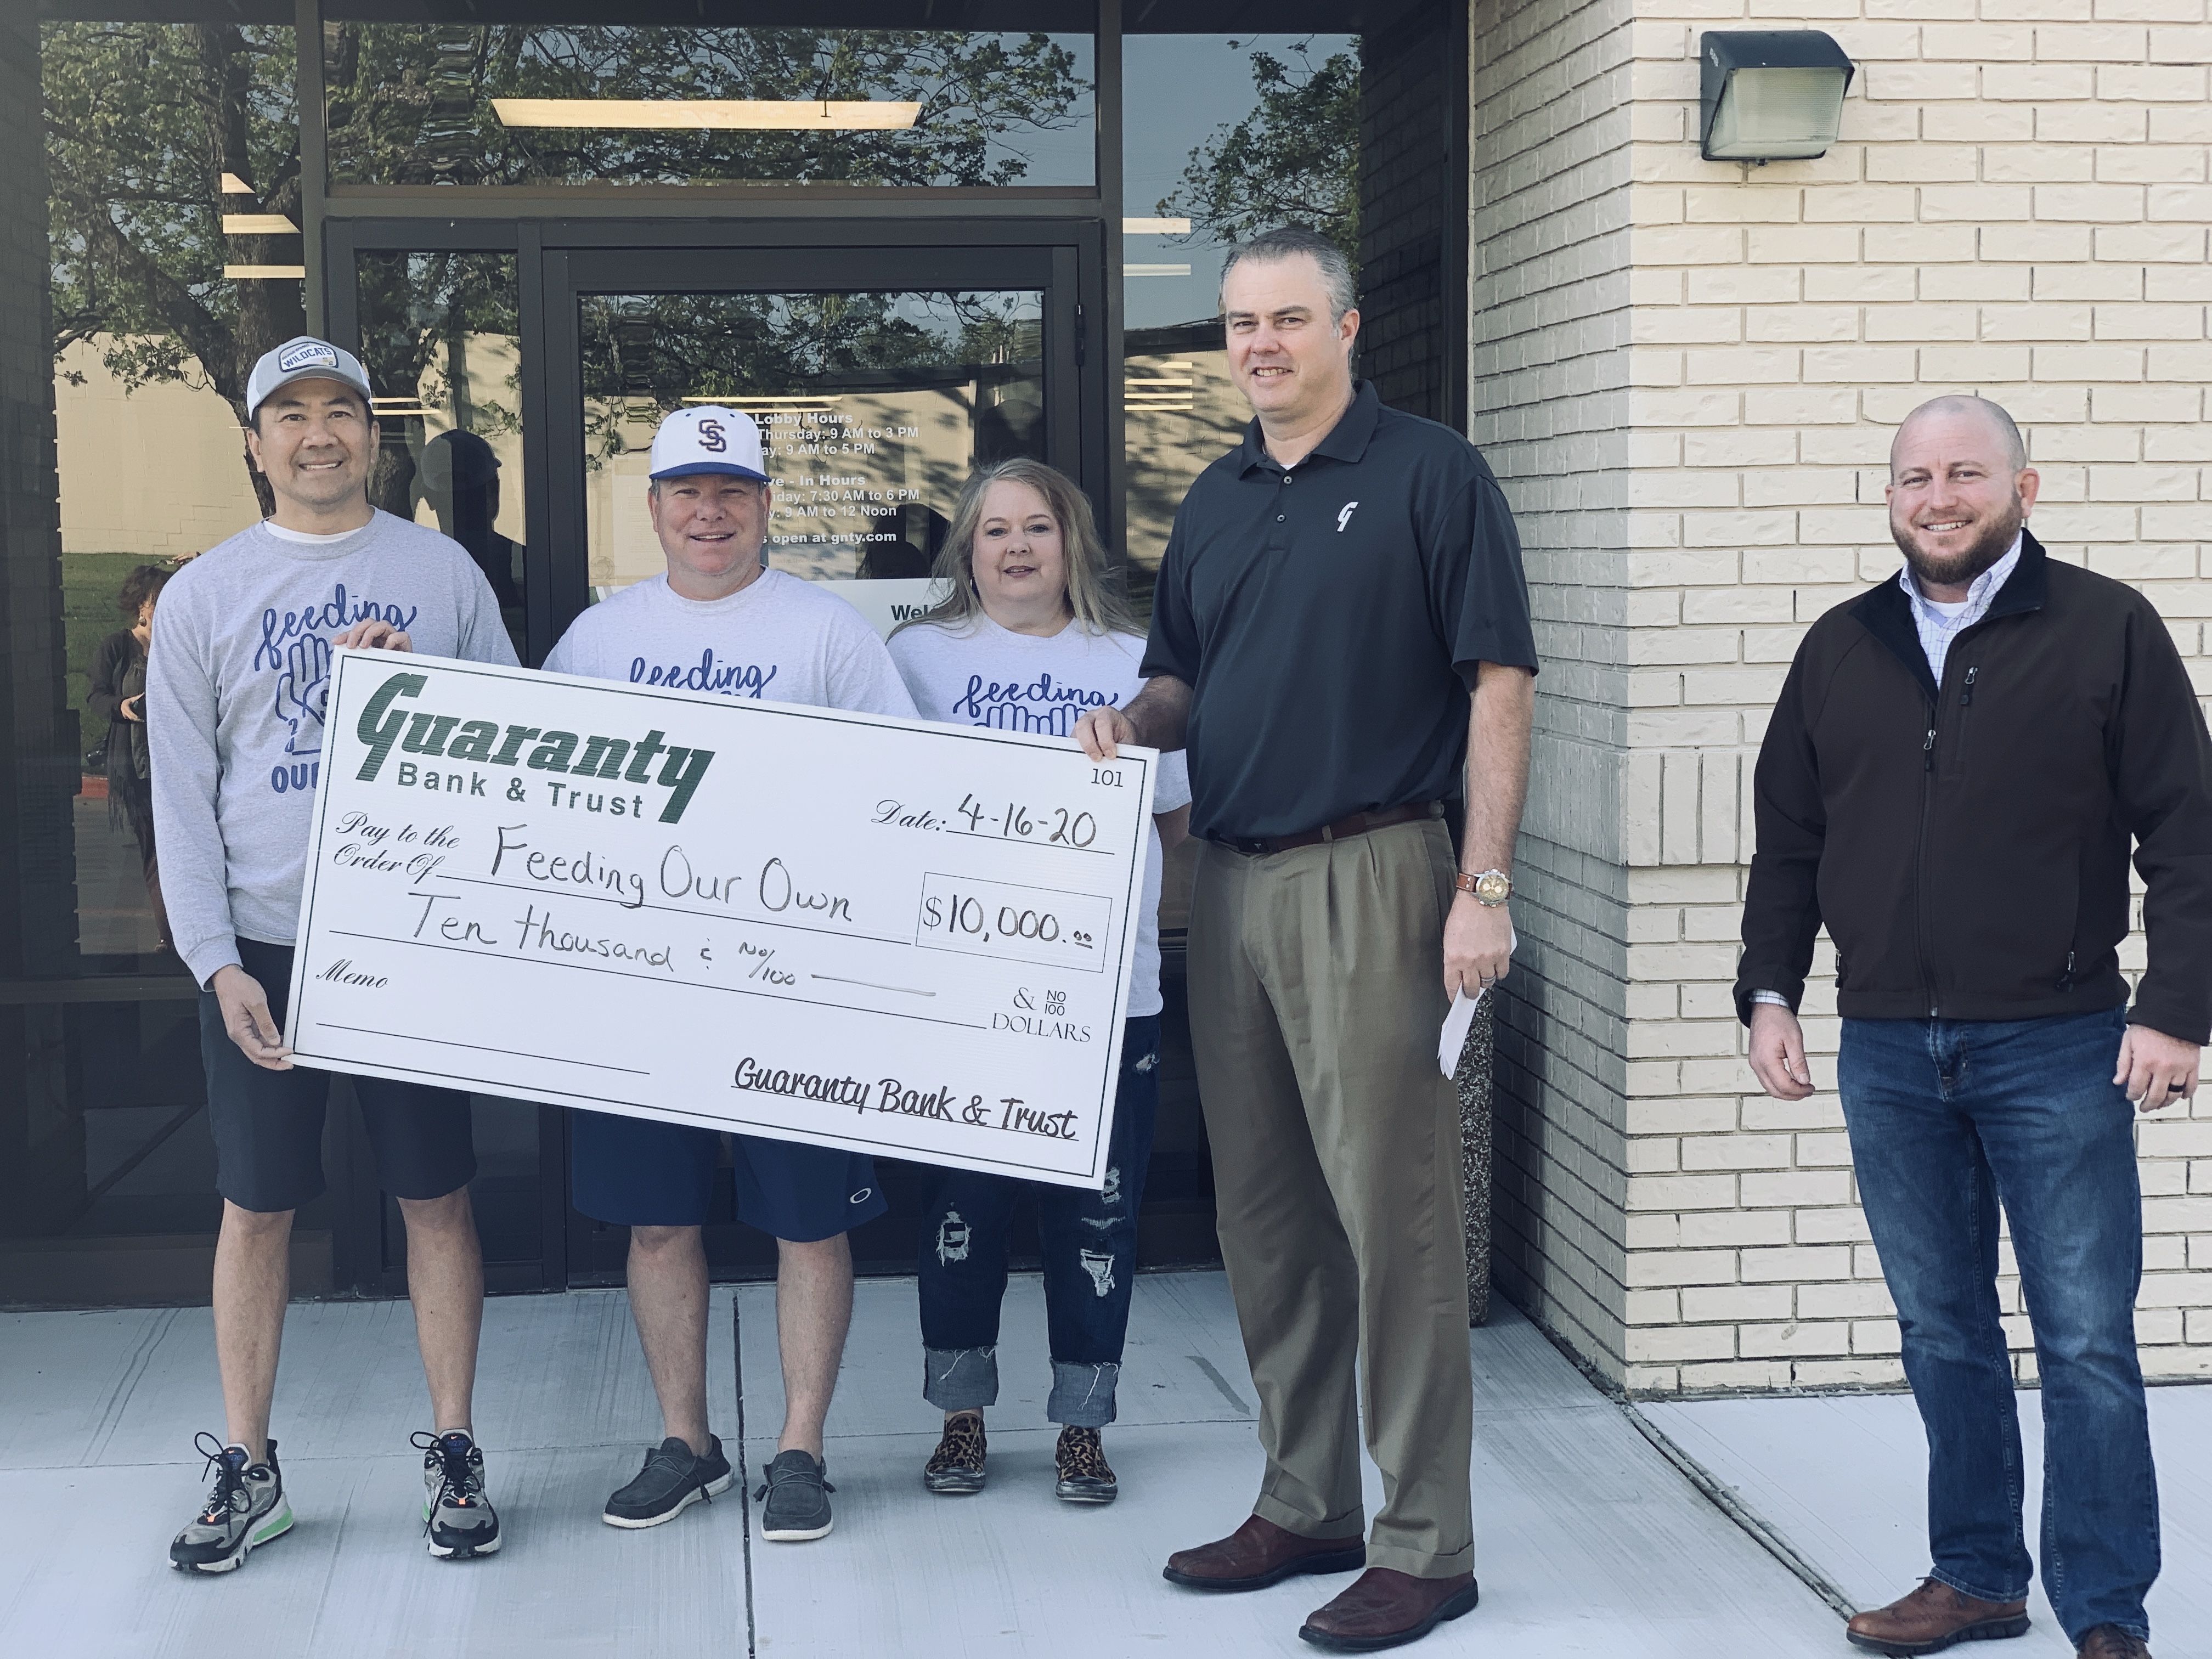 Guaranty Bank & Trust Gives $10,000 Donation to Feeding Our Own